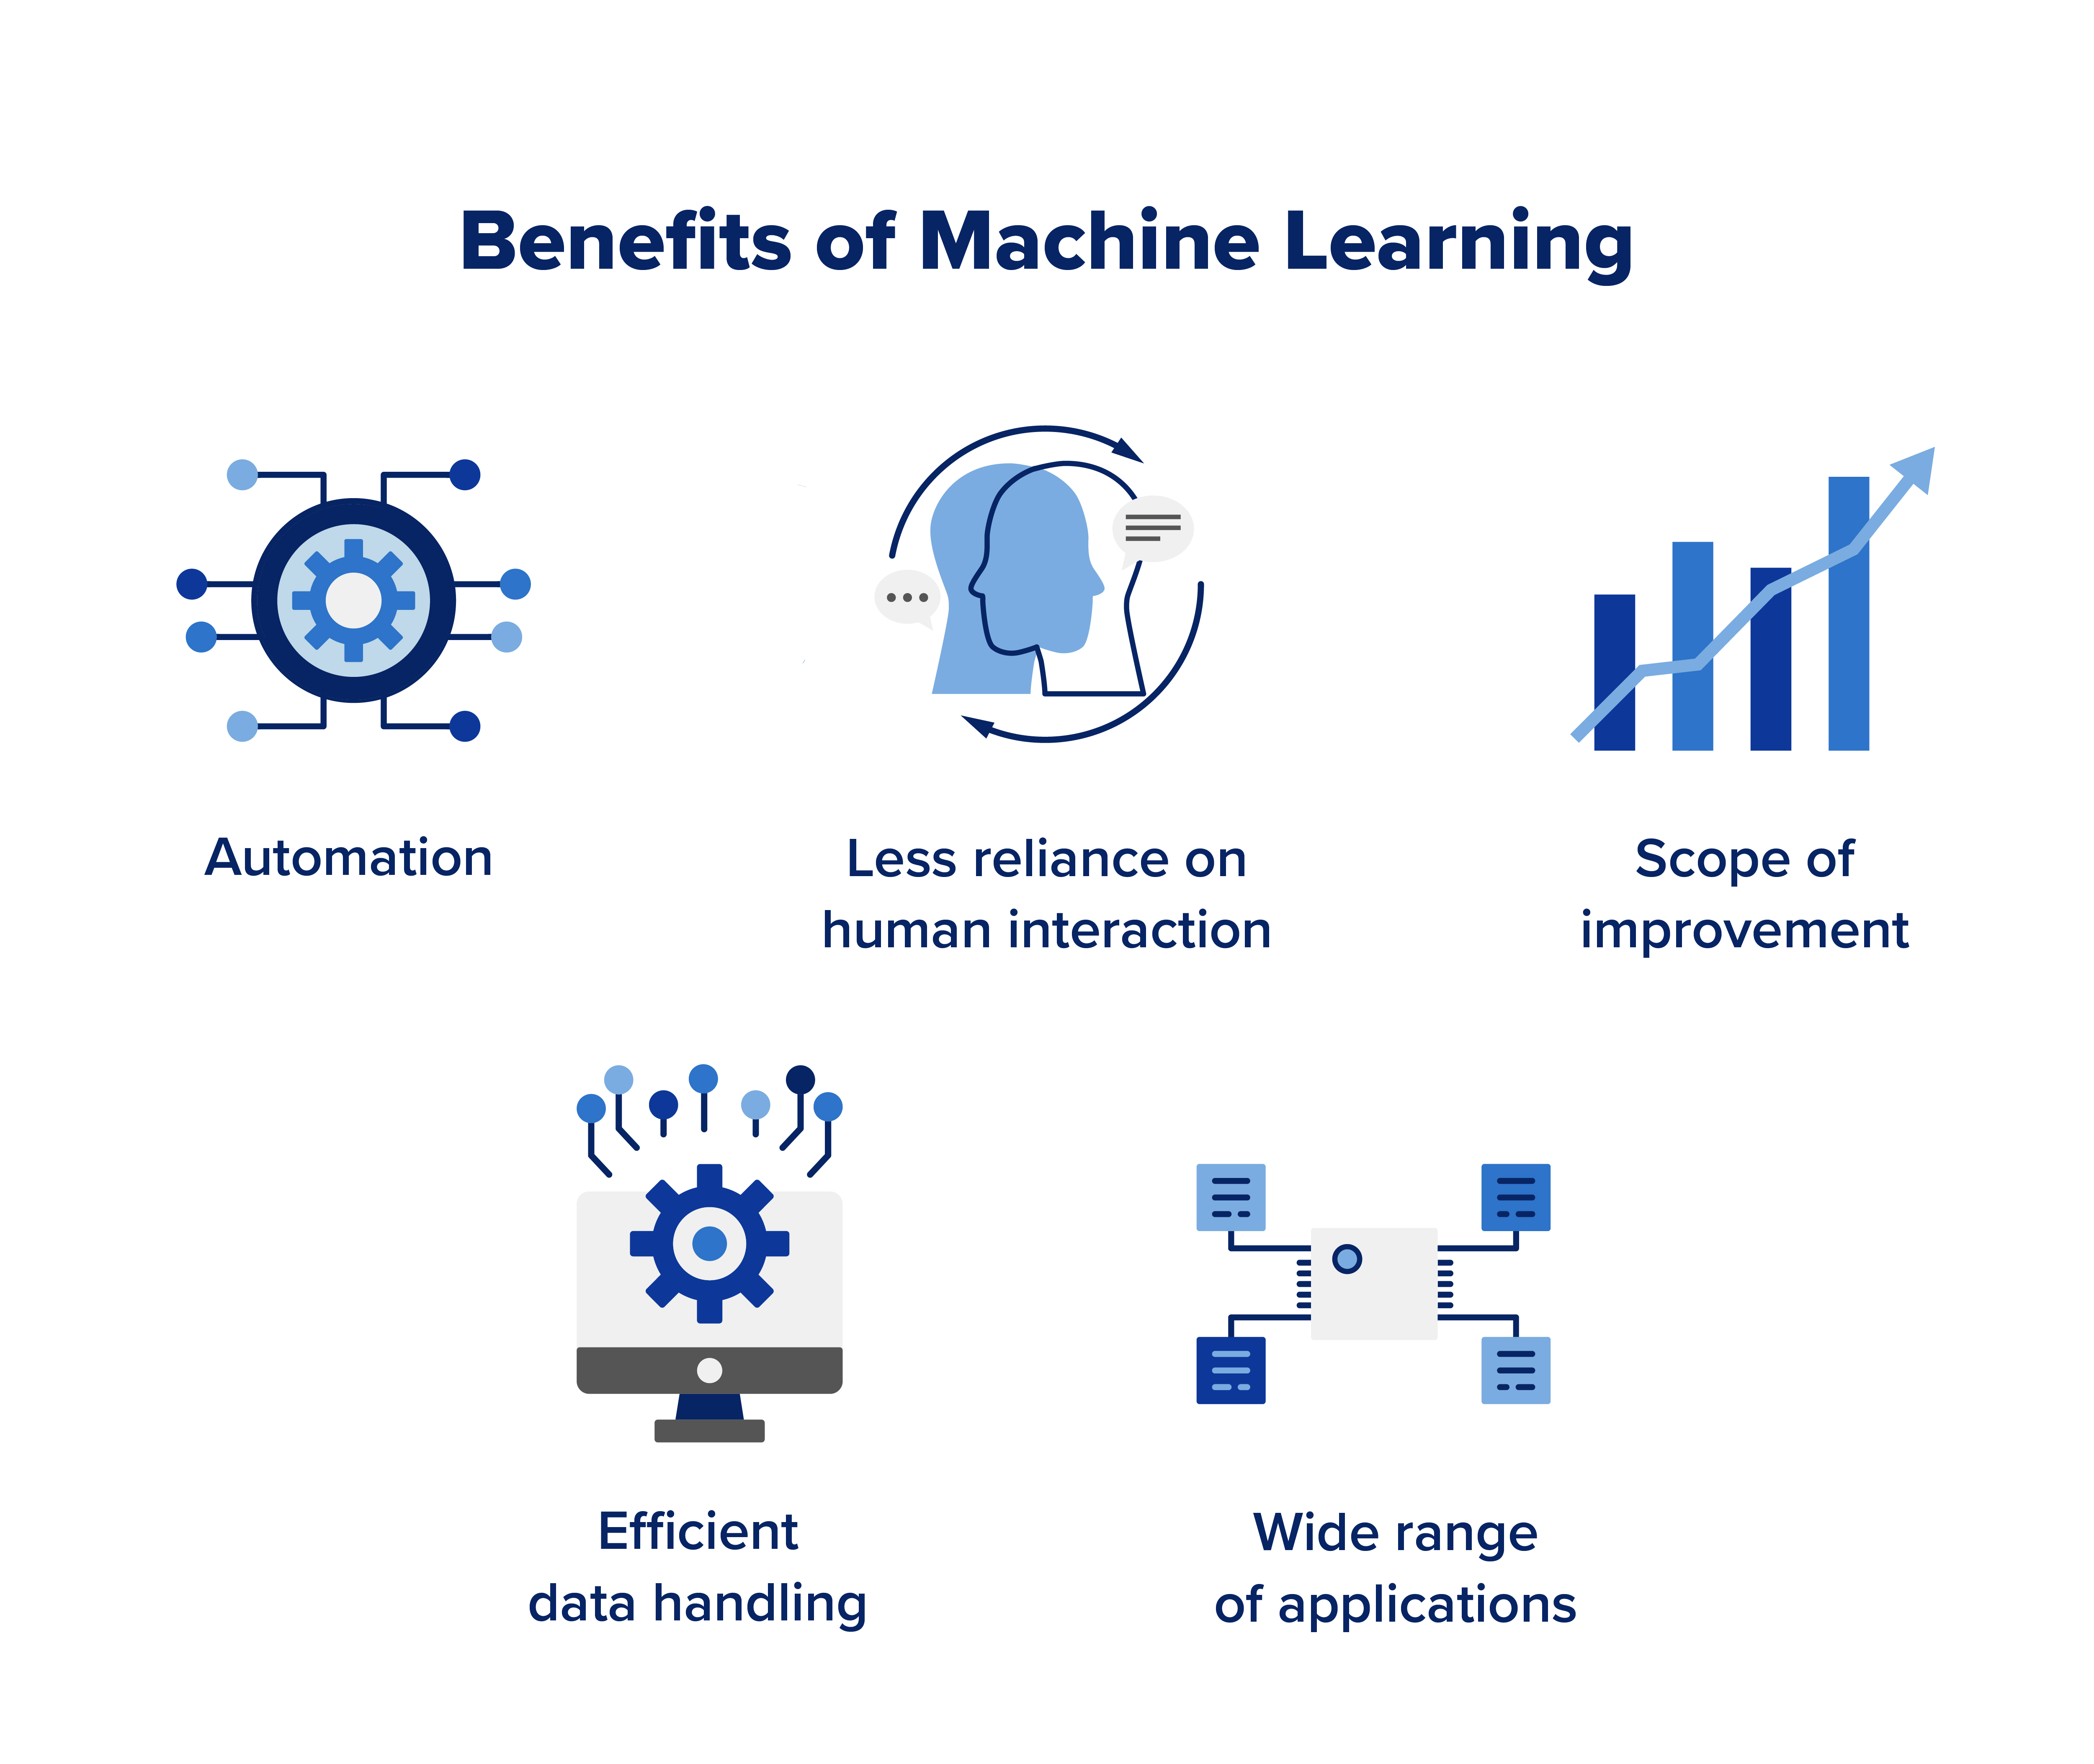  graphic highlighting the benefits provided by machine learning including: automation, less reliance on human interaction, scope of improvement, efficient data handling, wide range of applications